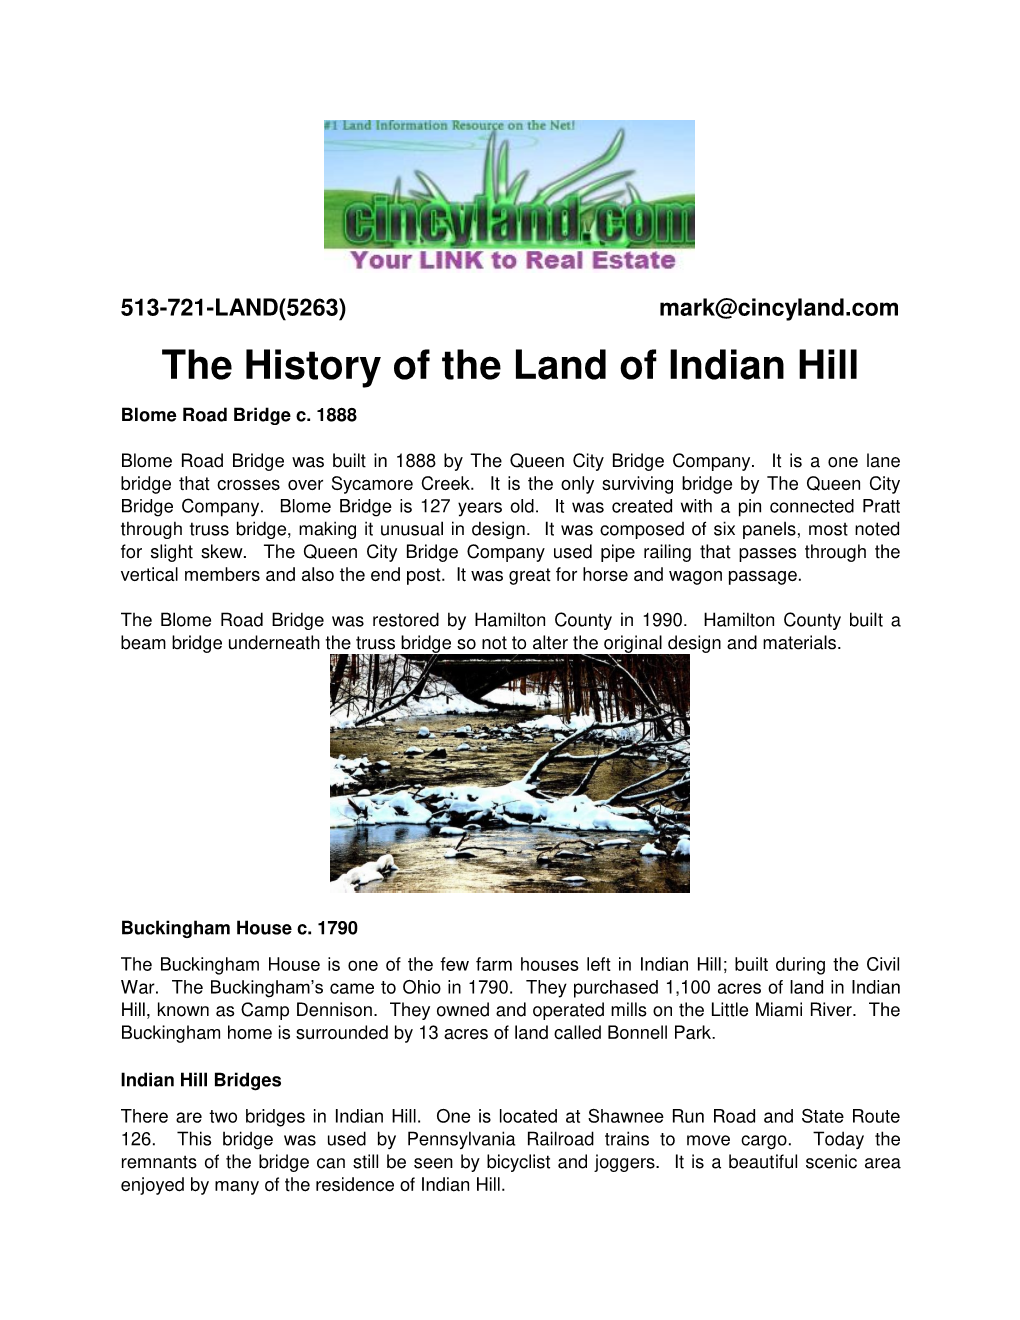 The History of the Land of Indian Hill